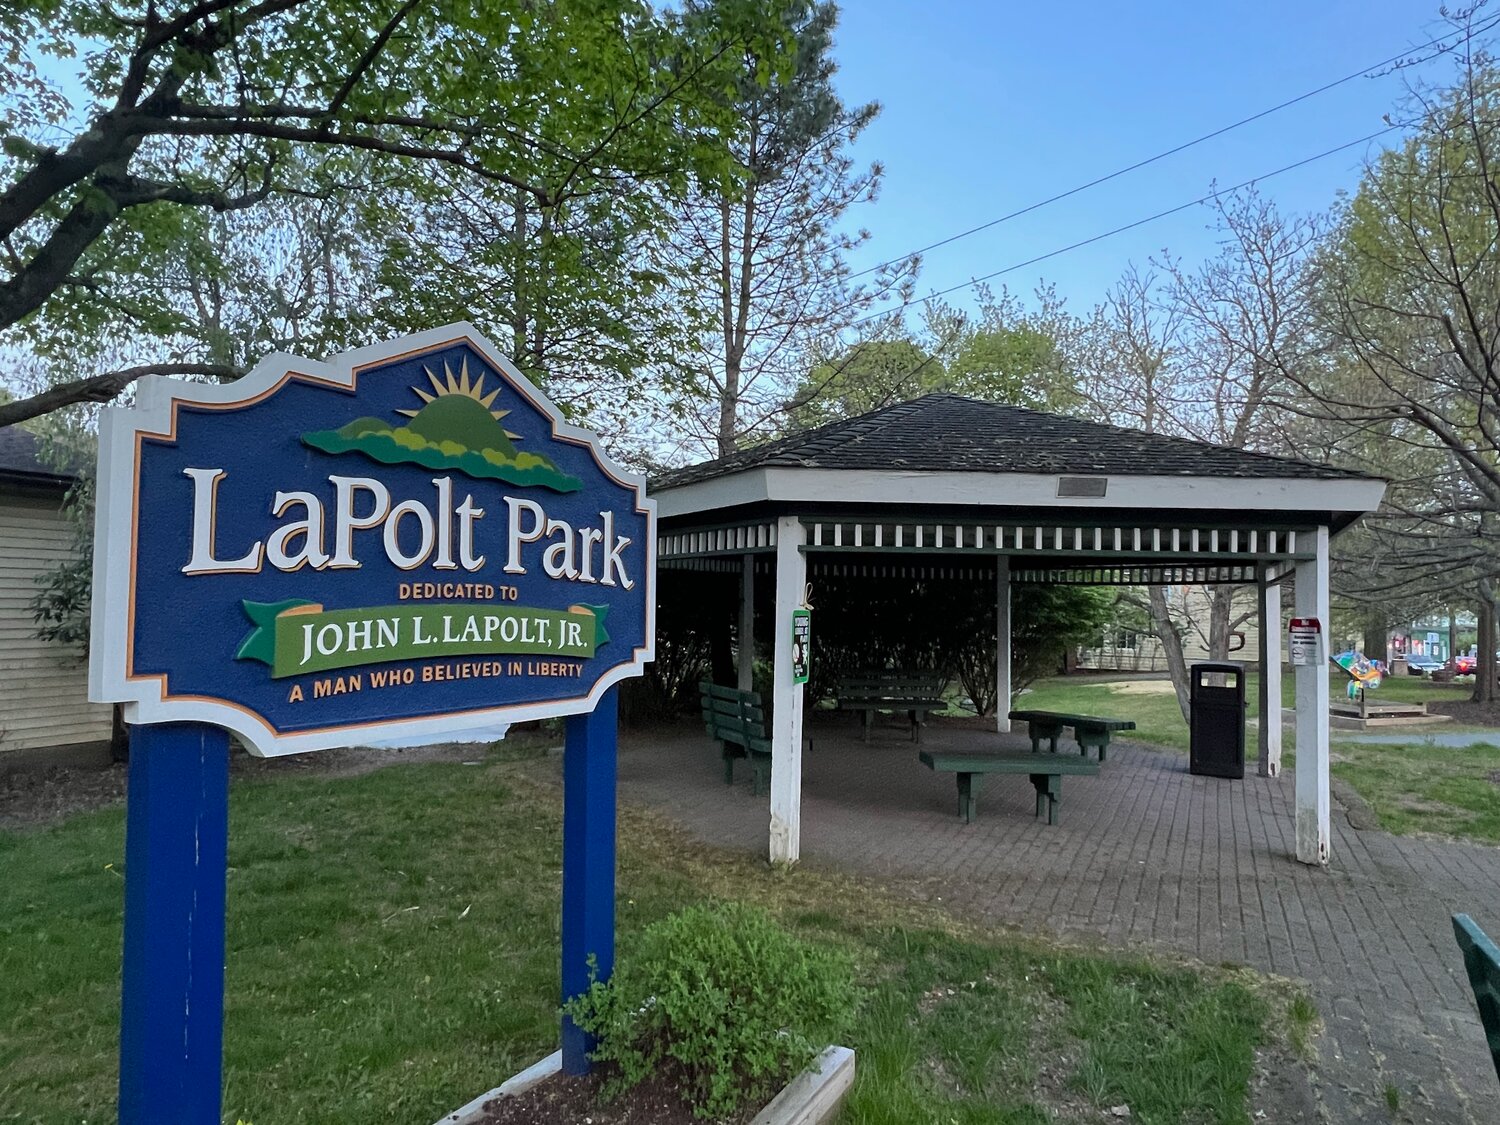 Sensor-activated lights and other small projects around LaPolt Park in Liberty are a point of discussion as the Town anticipates taking ownership of the public area from the Village.